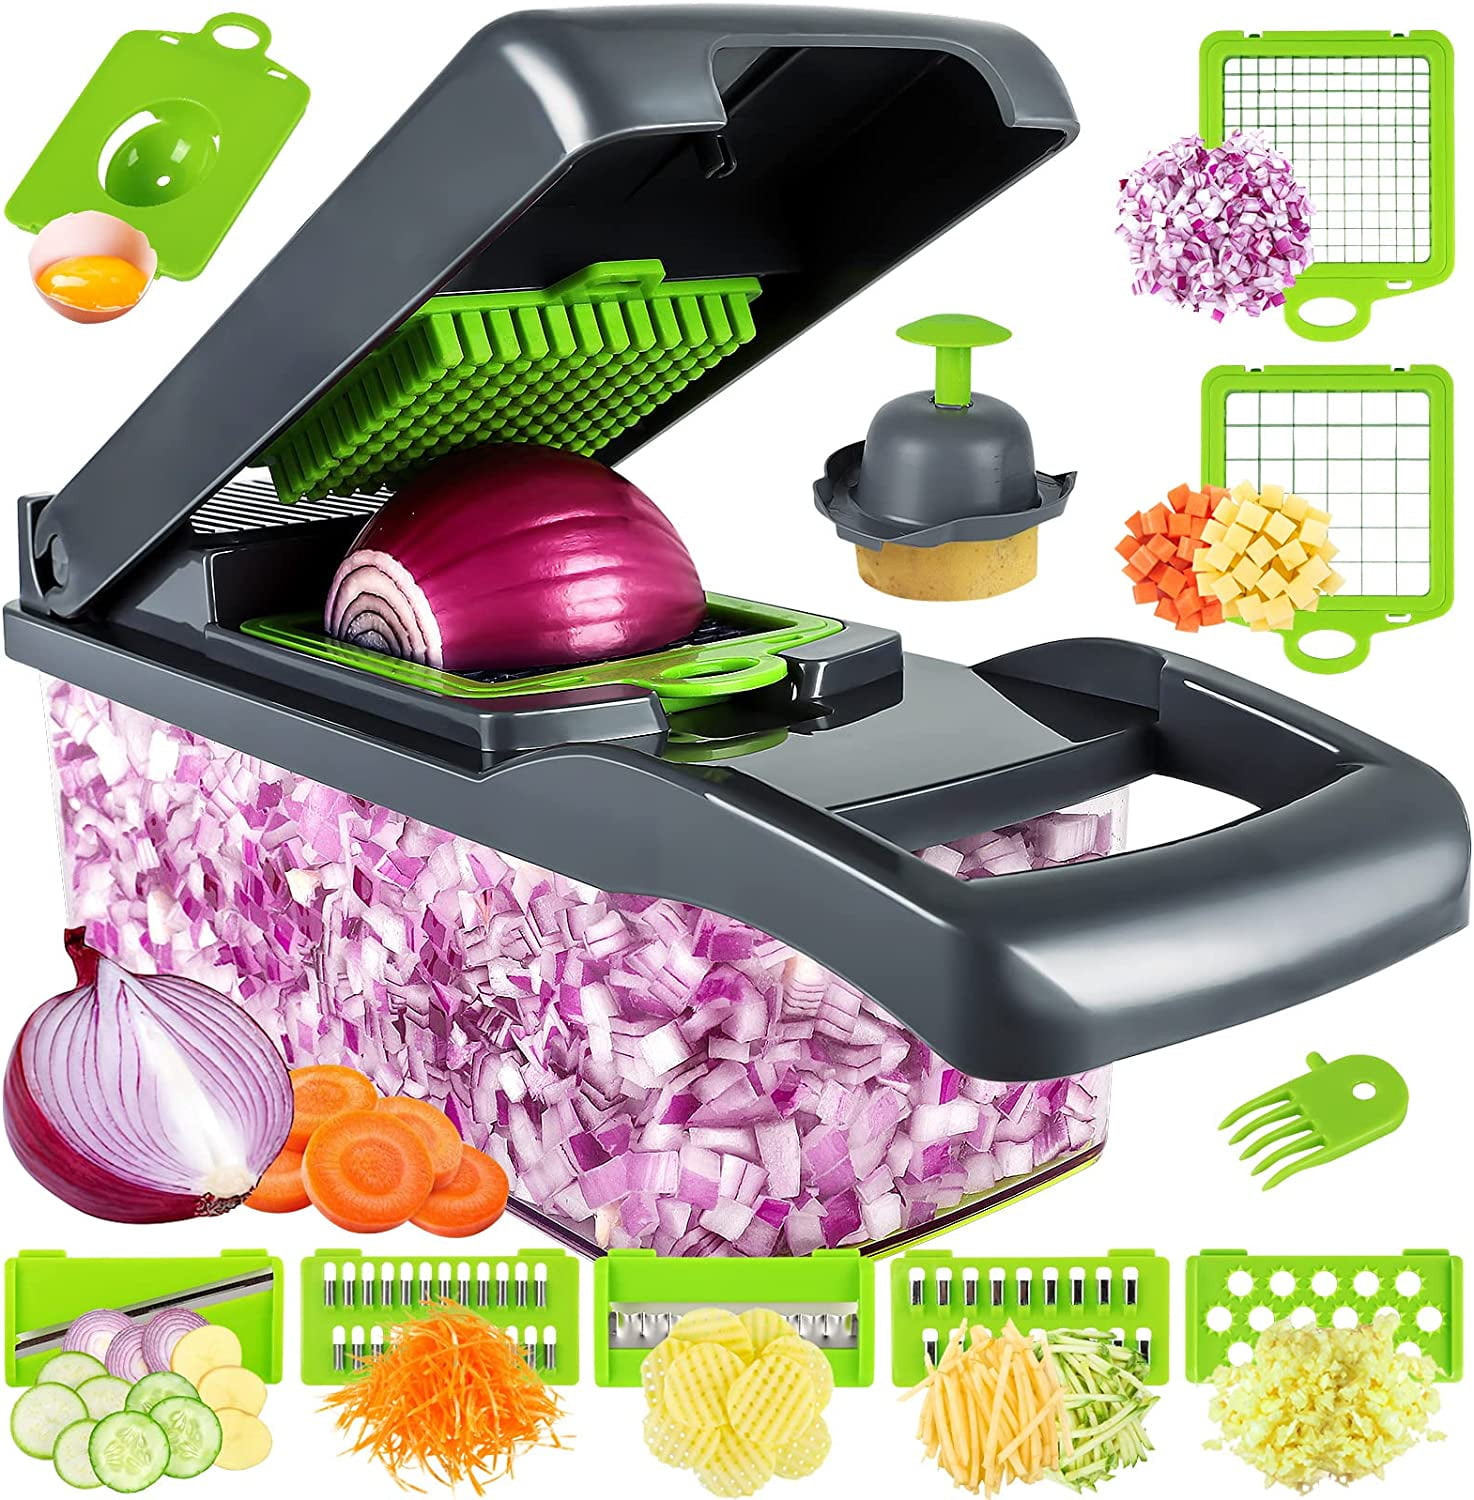 Mueller Vegetable Chopper - Heavy Duty Vegetable Slicer - Food Chopper with  Container - 4 Blades - Walmart.com